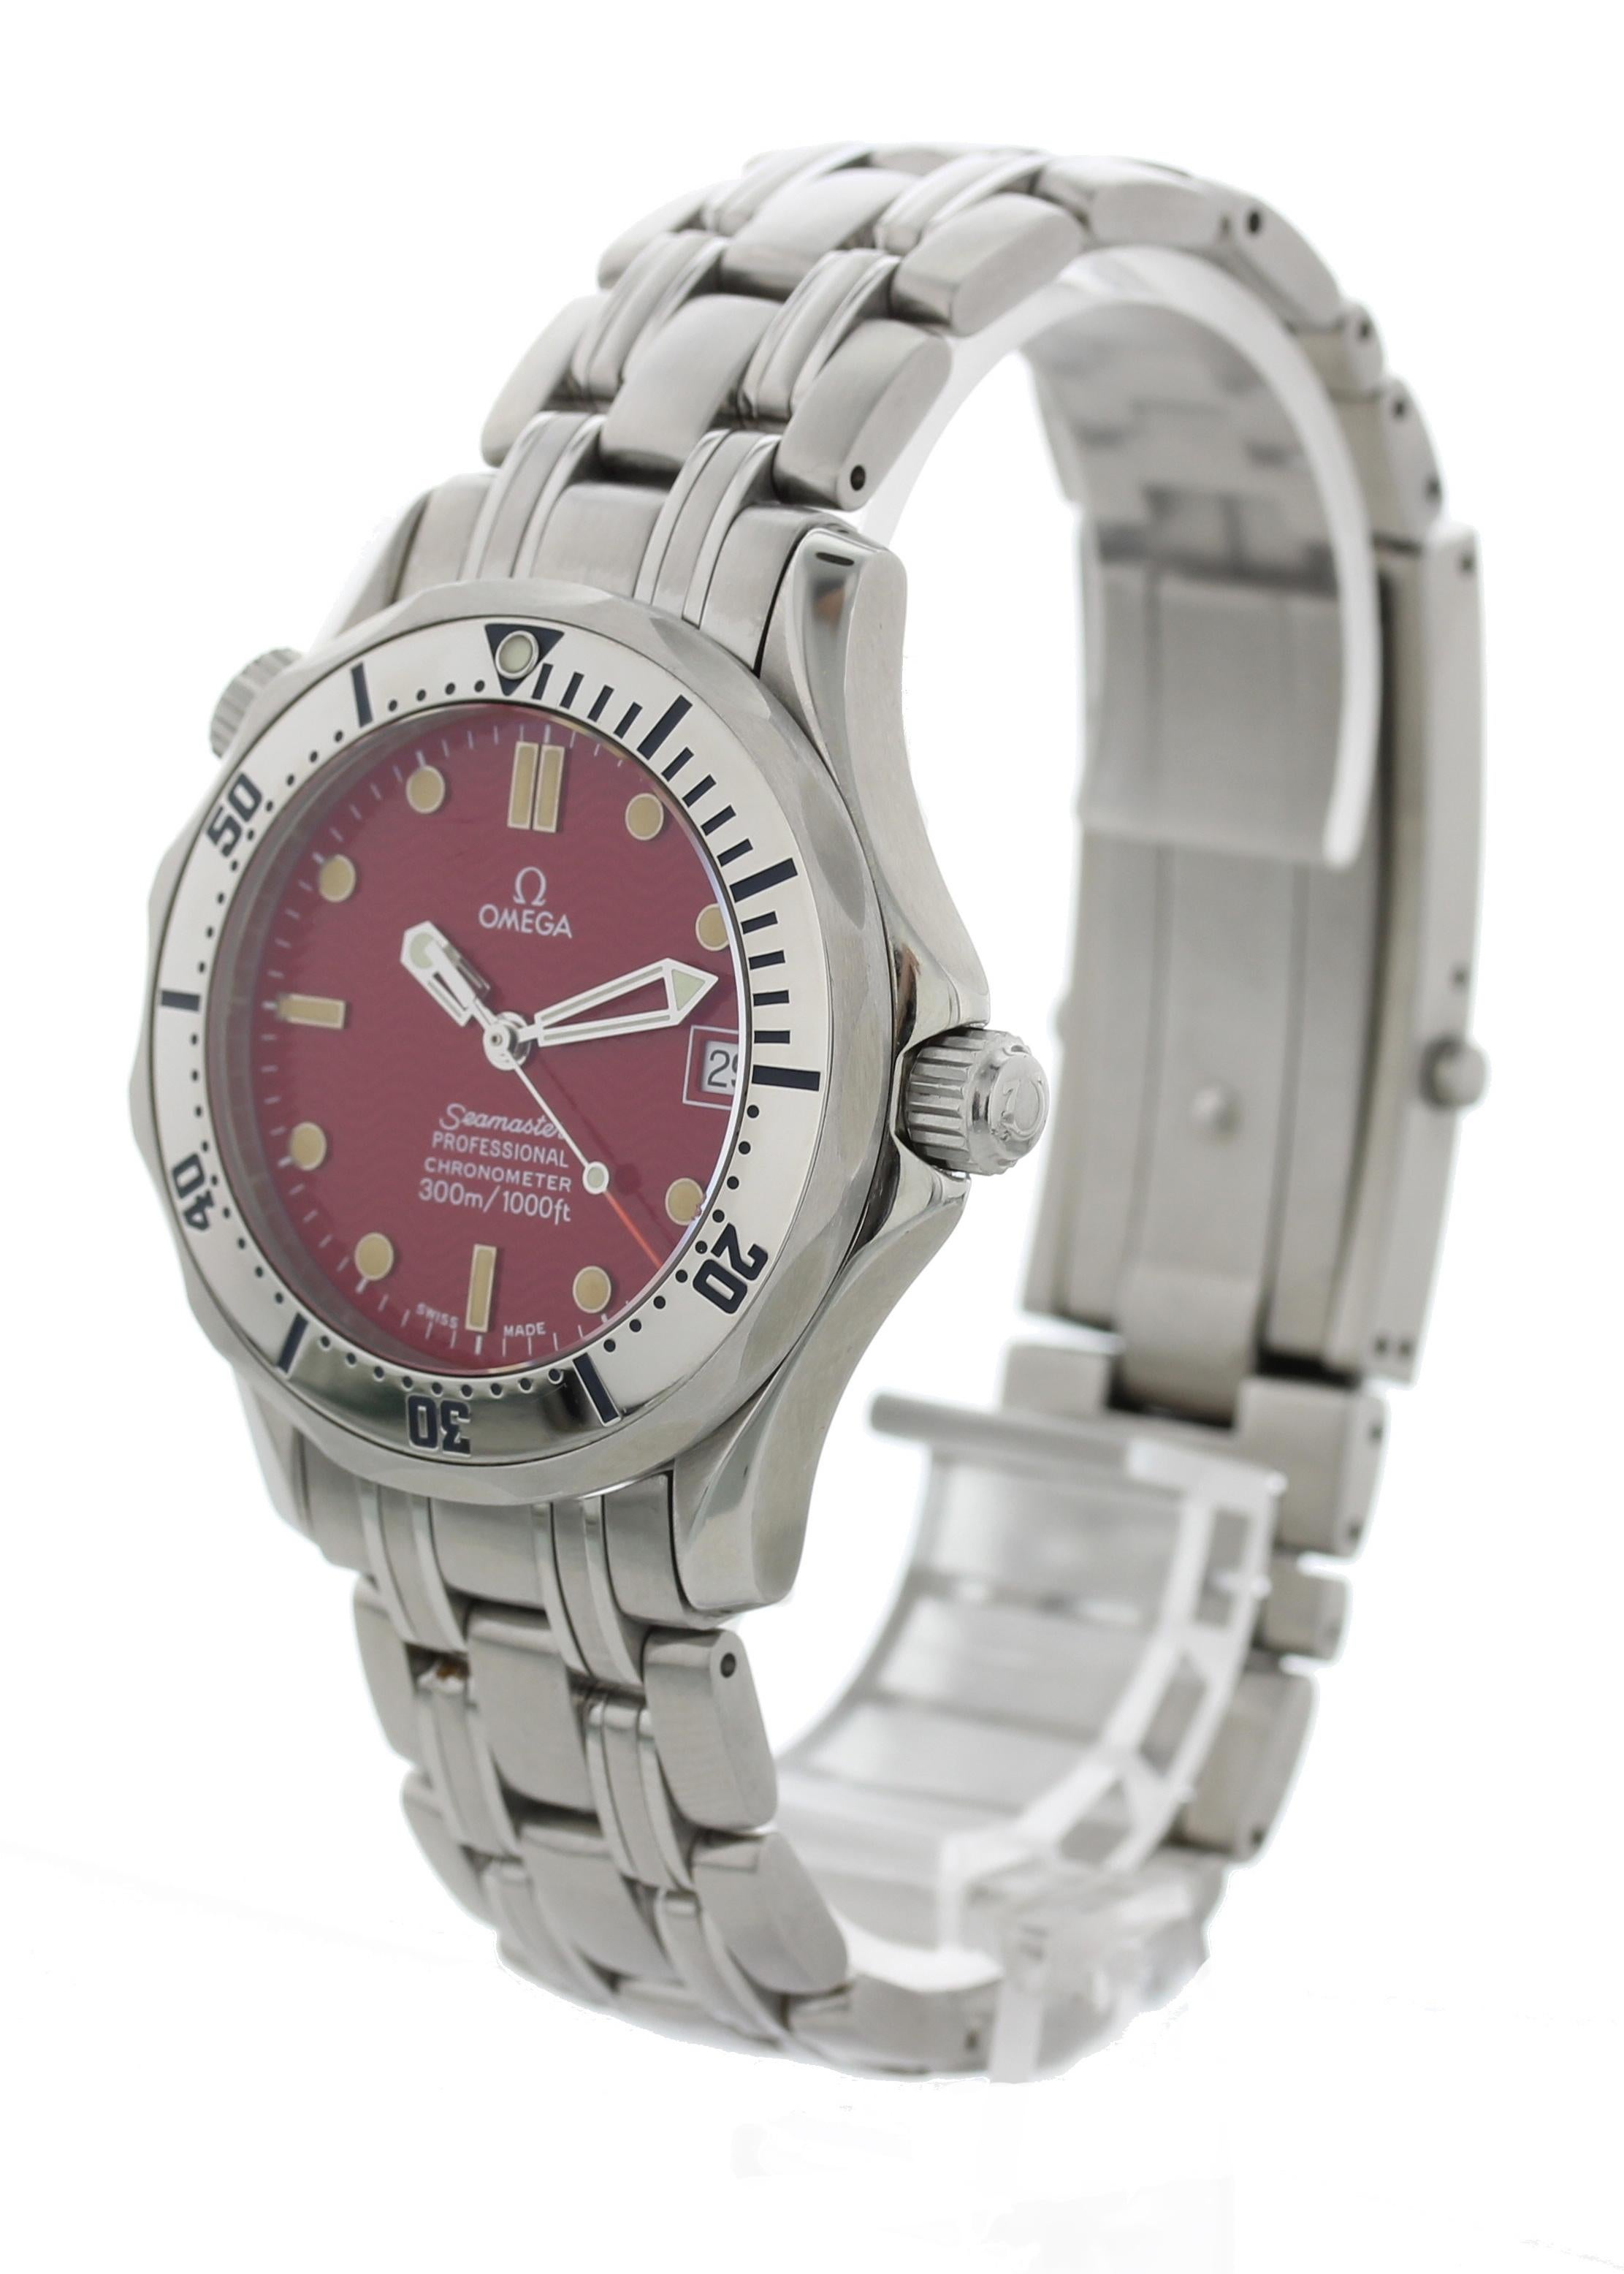 Omega Seamaster Professional 1681602 Midsize Watch. 36mm stainless steel case. Unidirectional bezel with stainless steel bezel insert. Red dial with luminous steel hands and dot hour markers. stainless steel seamster bracelet with push button fold